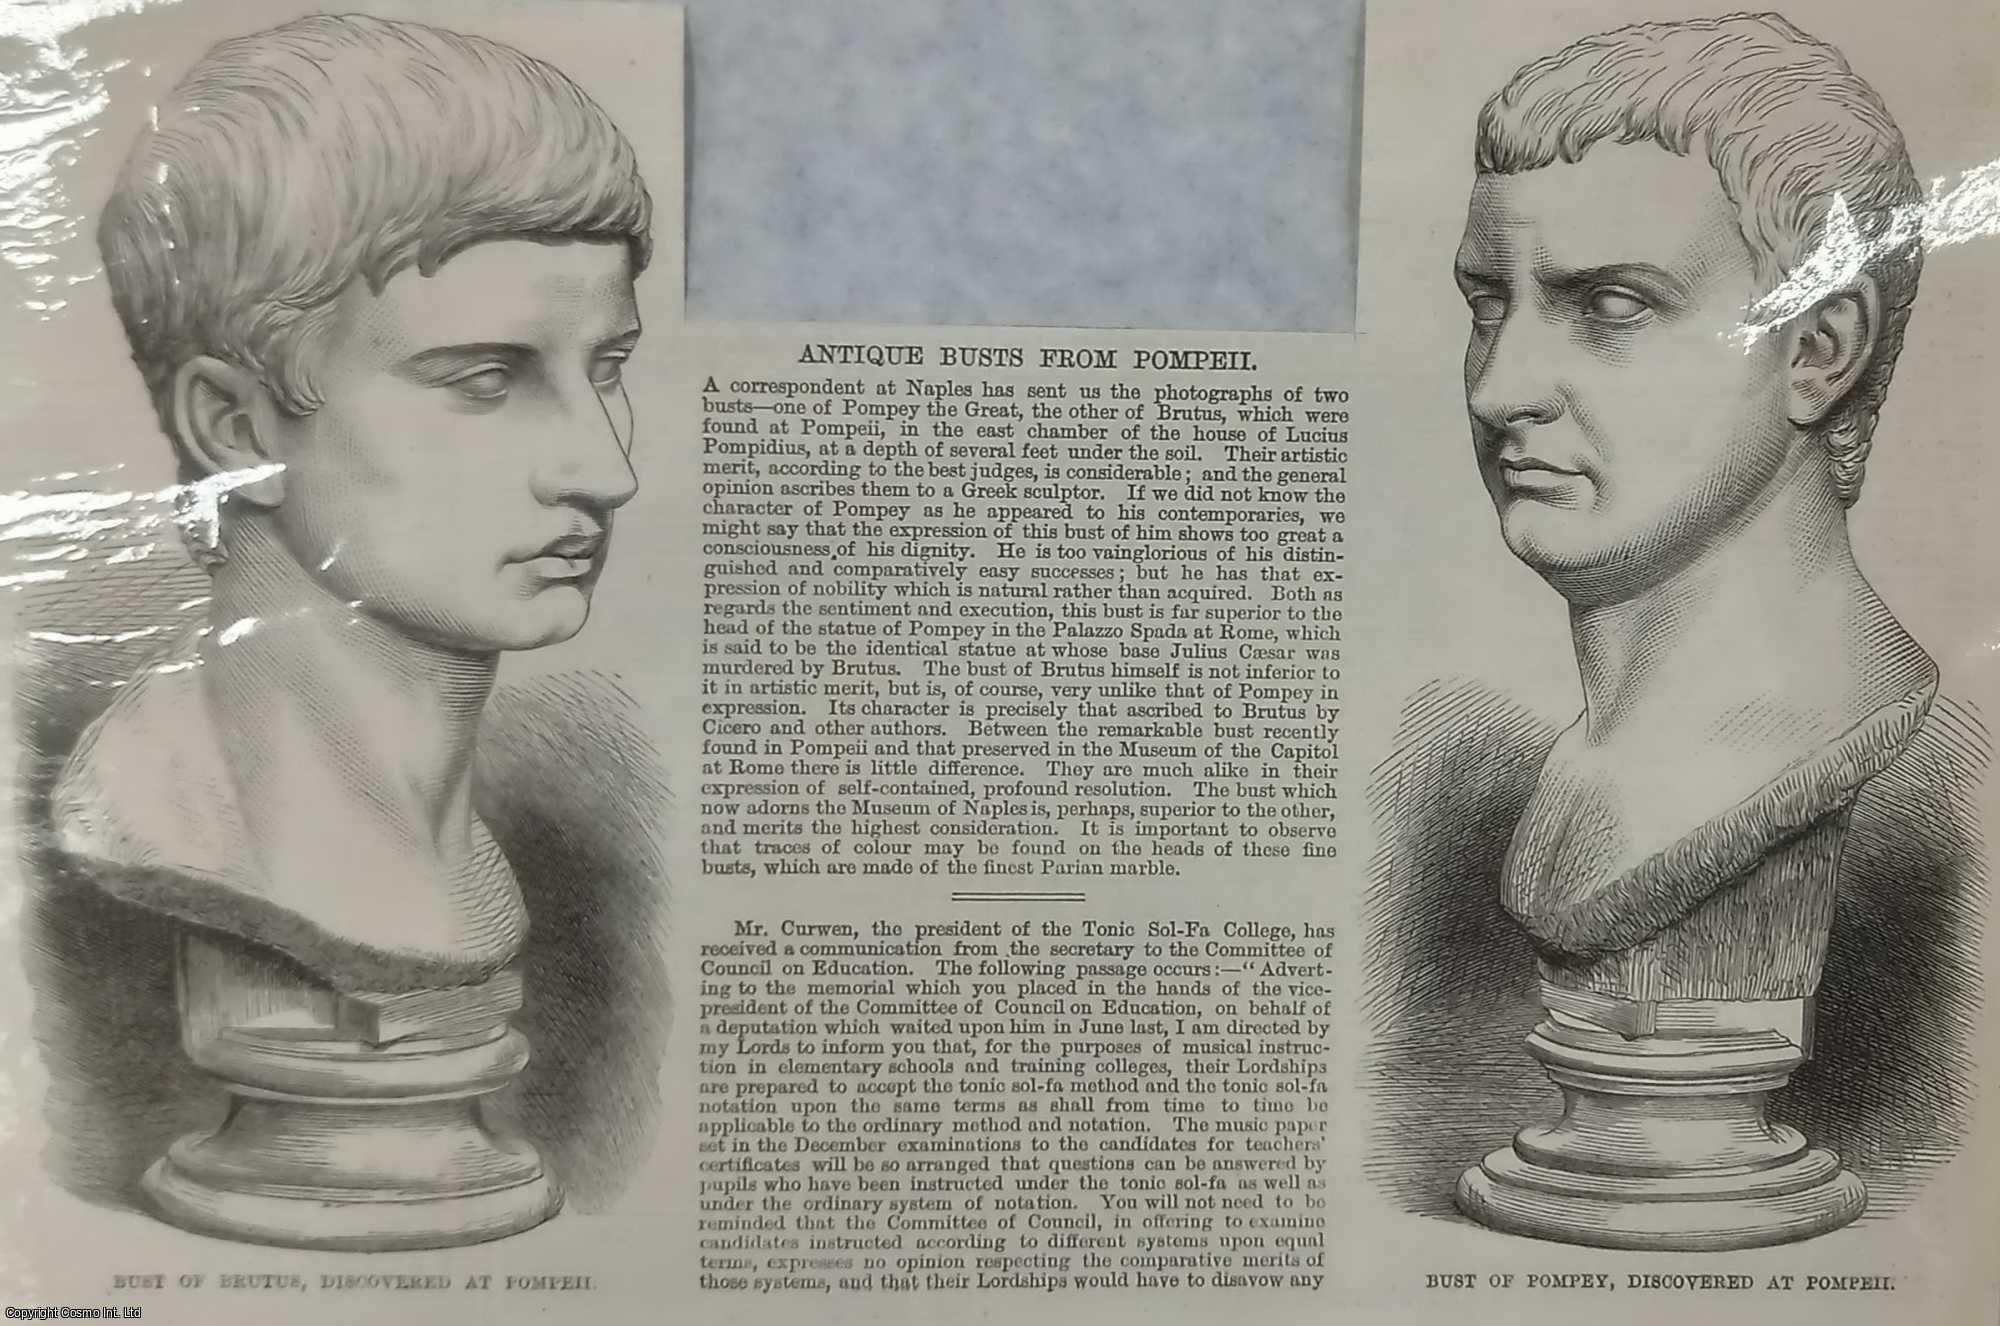 POMPEI - Antique Busts of Brutus and Pompey Discovered at Pompei. Original prints and short article from the Illustrated London News, 1869.